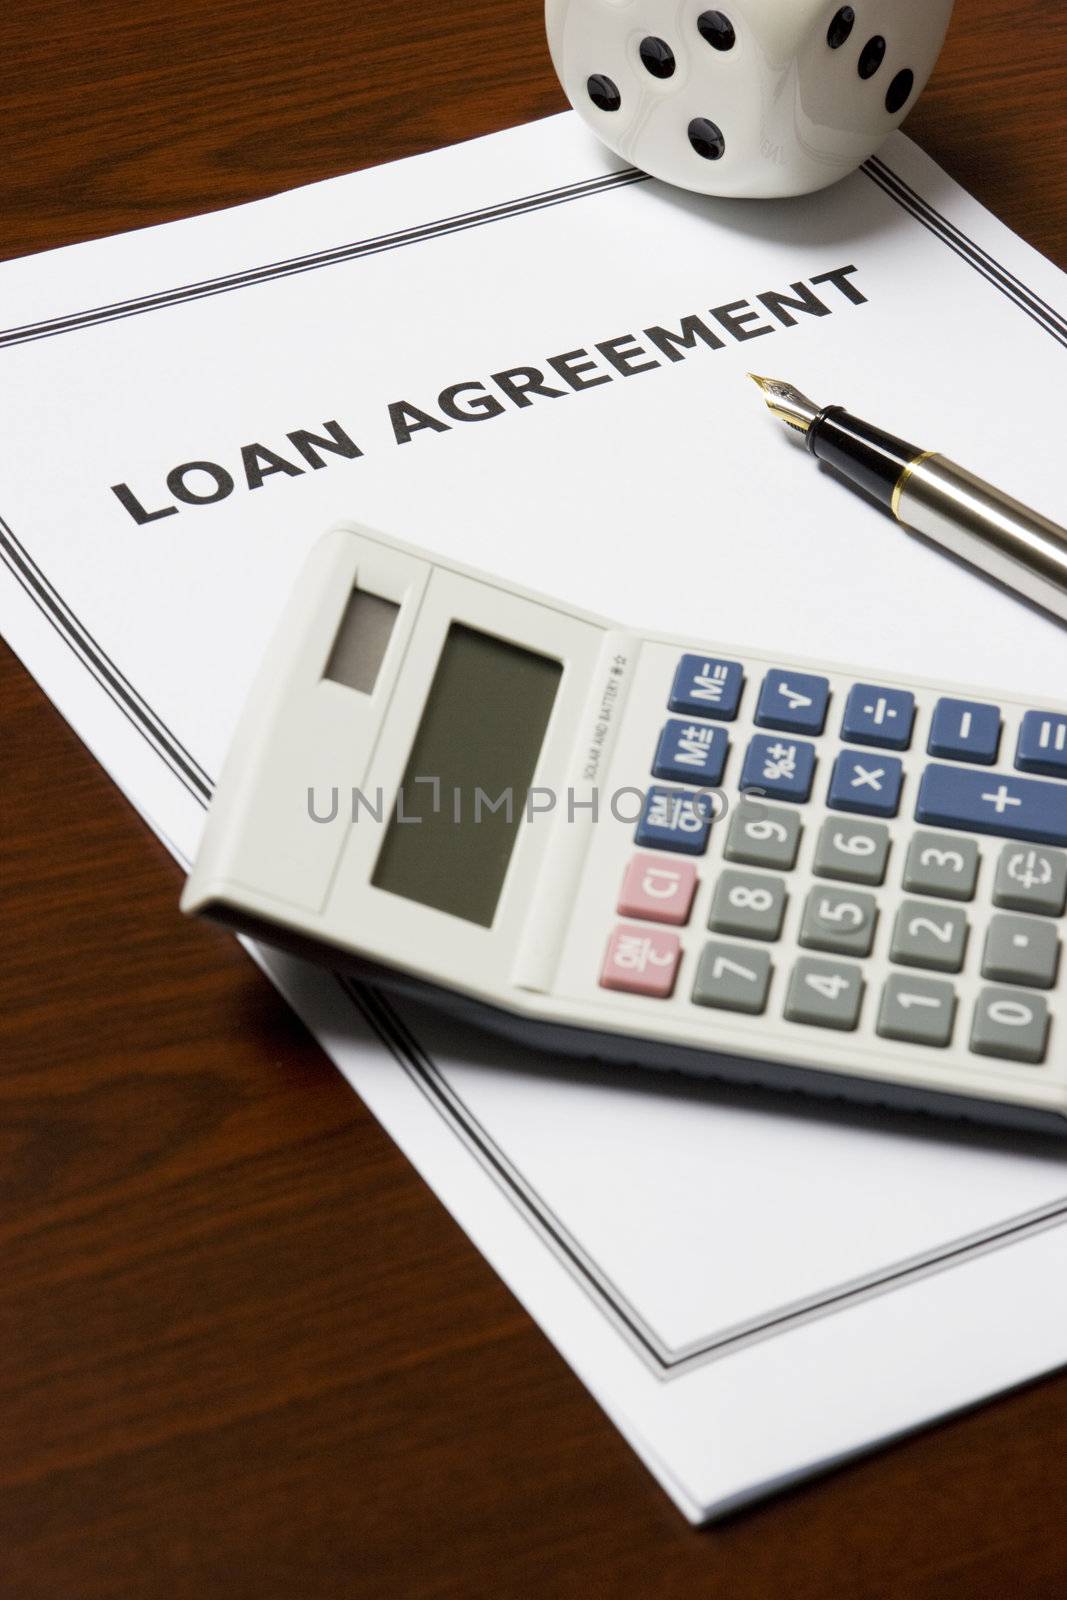 Image of a loan agreement on an office table.